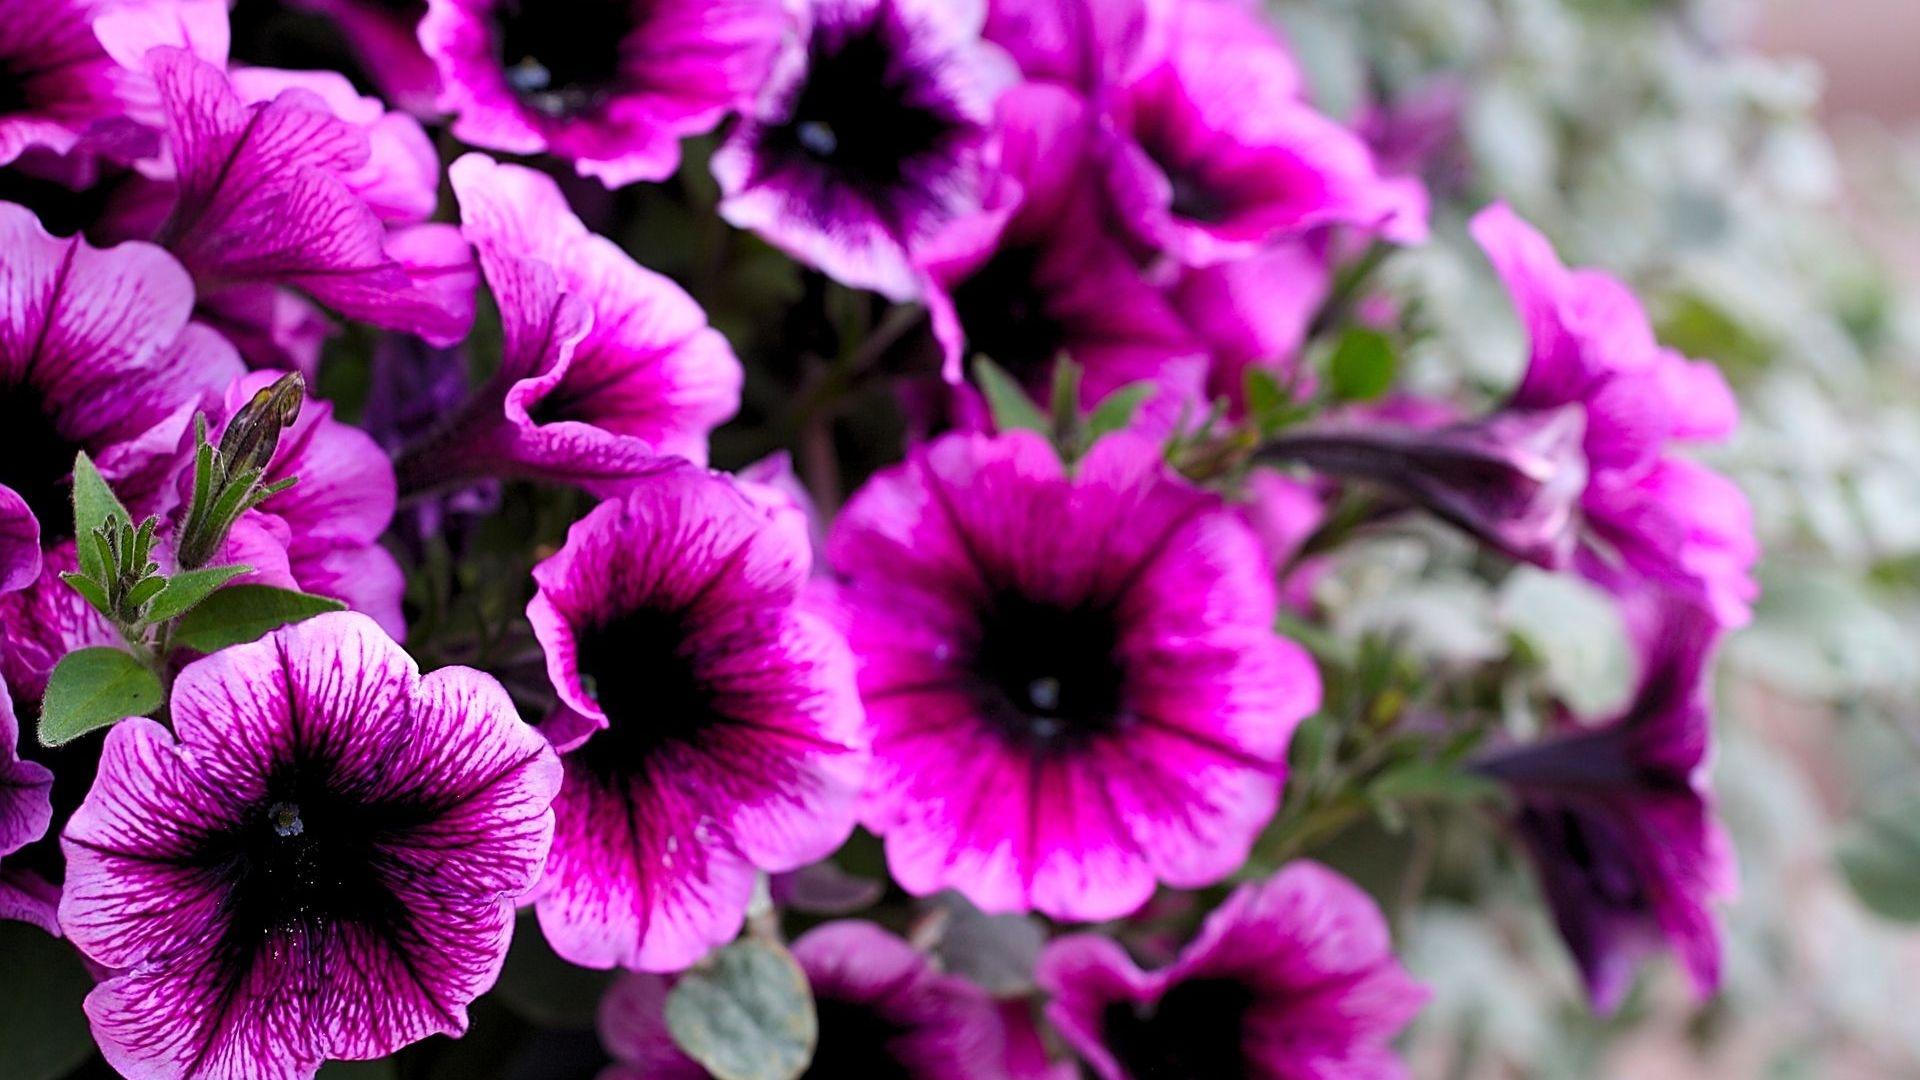 Pink Petunias wallpaper. nature and landscape